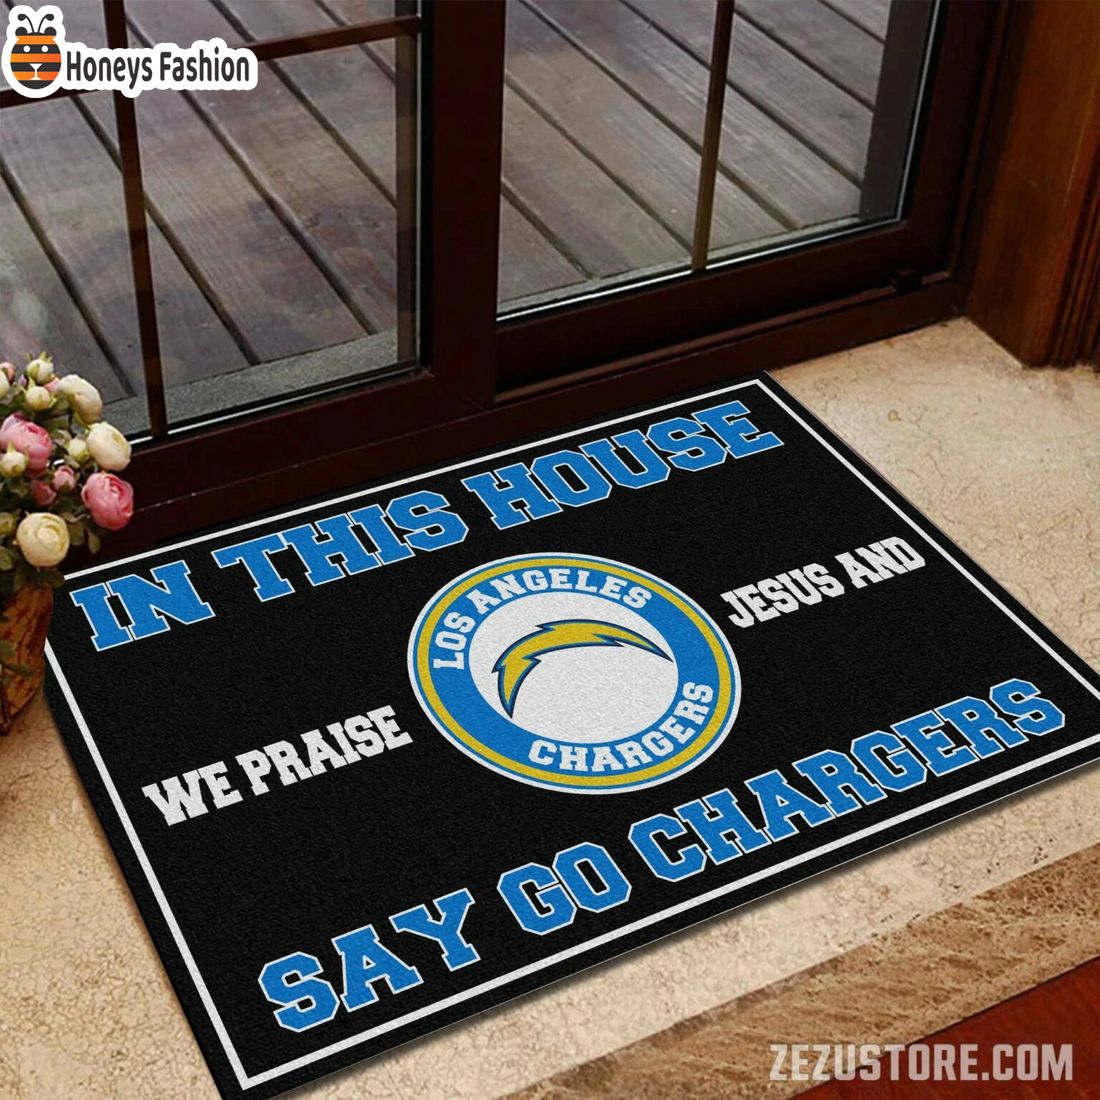 In this house we praise jesus and say go Chargers doormat